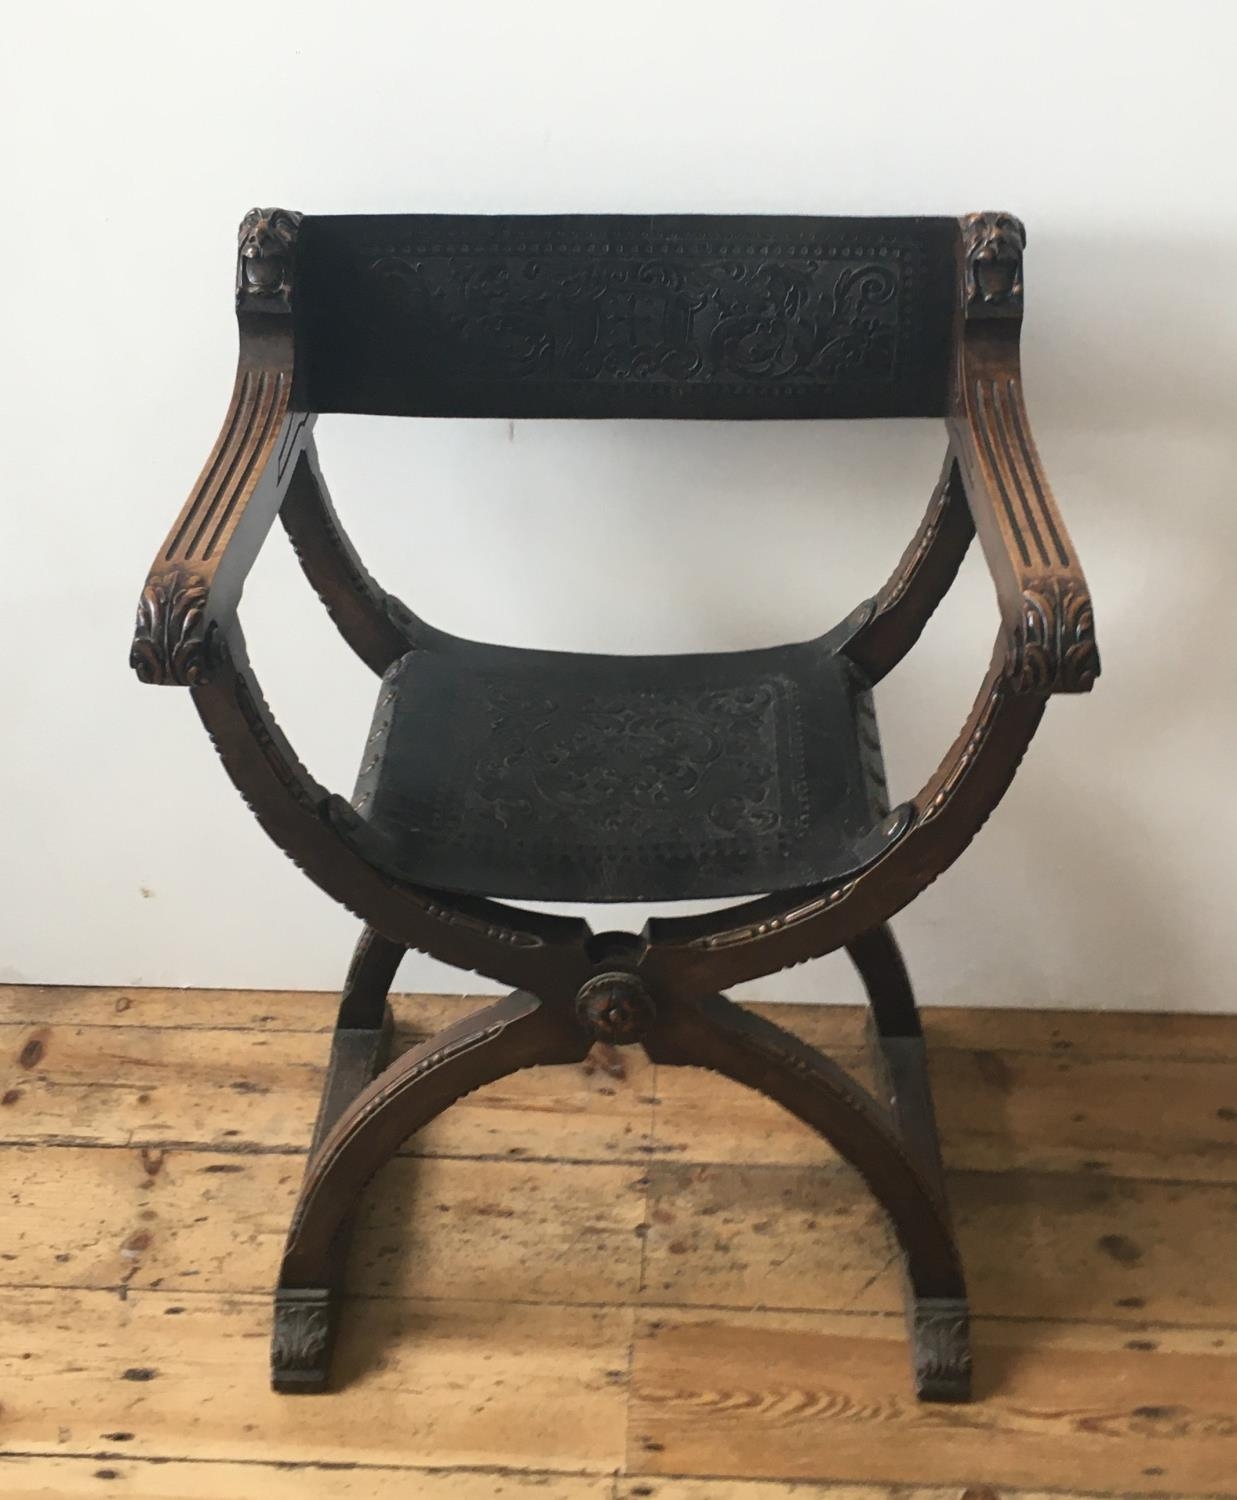 19th CENTURY SAVANAROLA FOLDING CHAIR, with ornate embossed leather seat and back panels 89cm high x